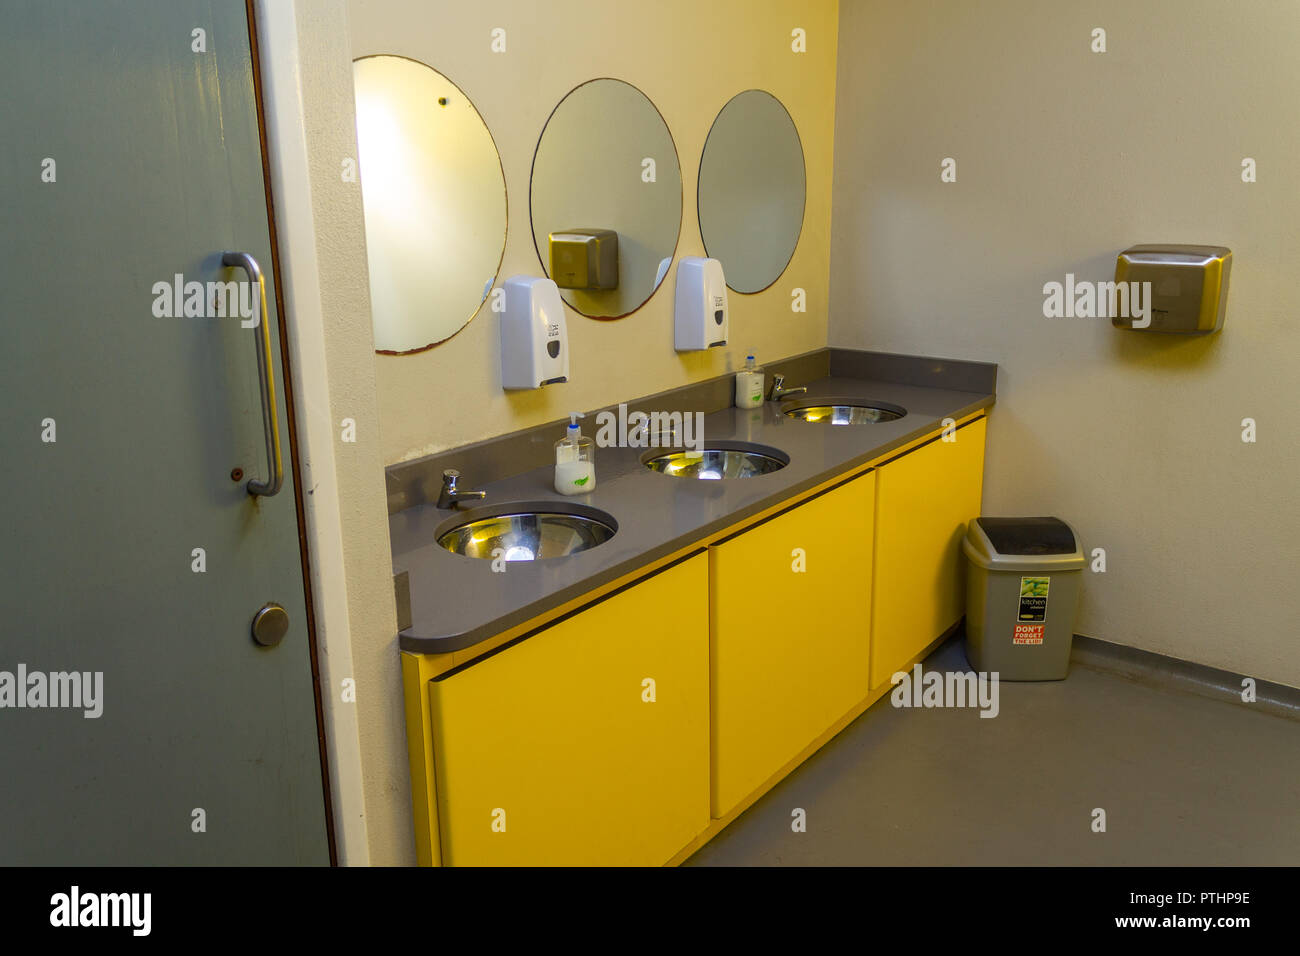 washroom with wash basins and mirrors in a public toilet or lavatory Stock Photo